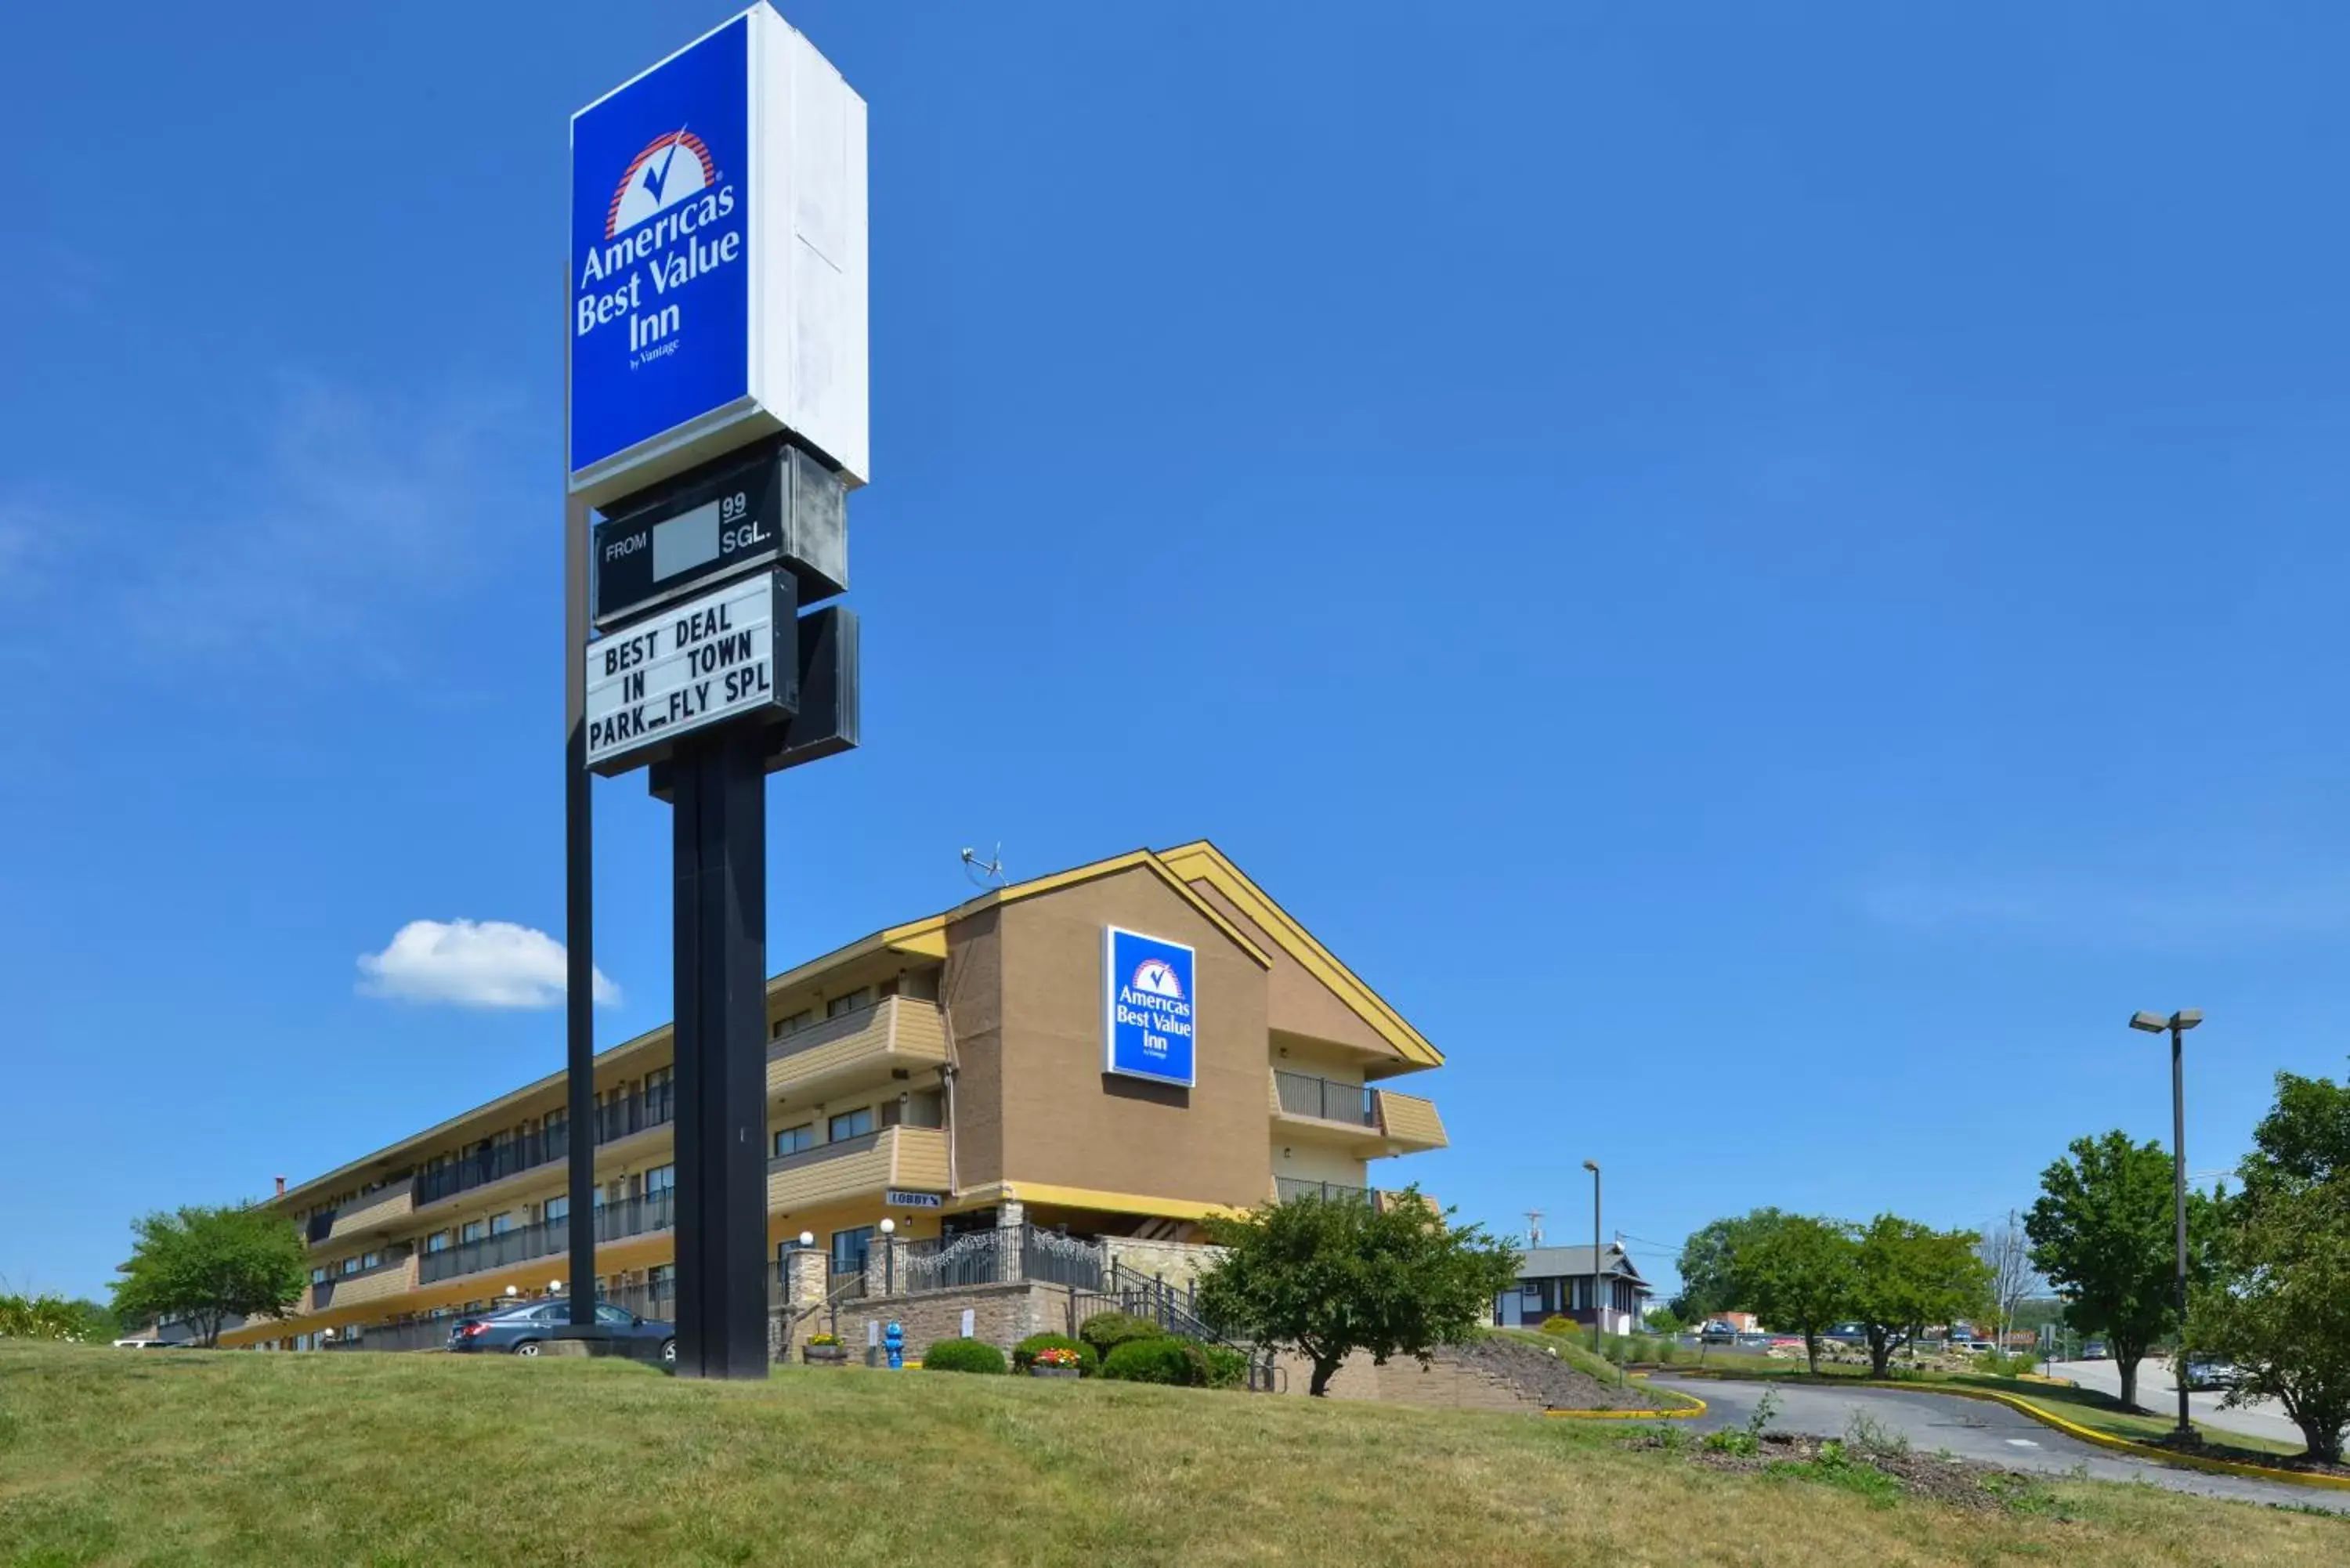 Property Building in Americas Best Value Inn-Pittsburgh Airport